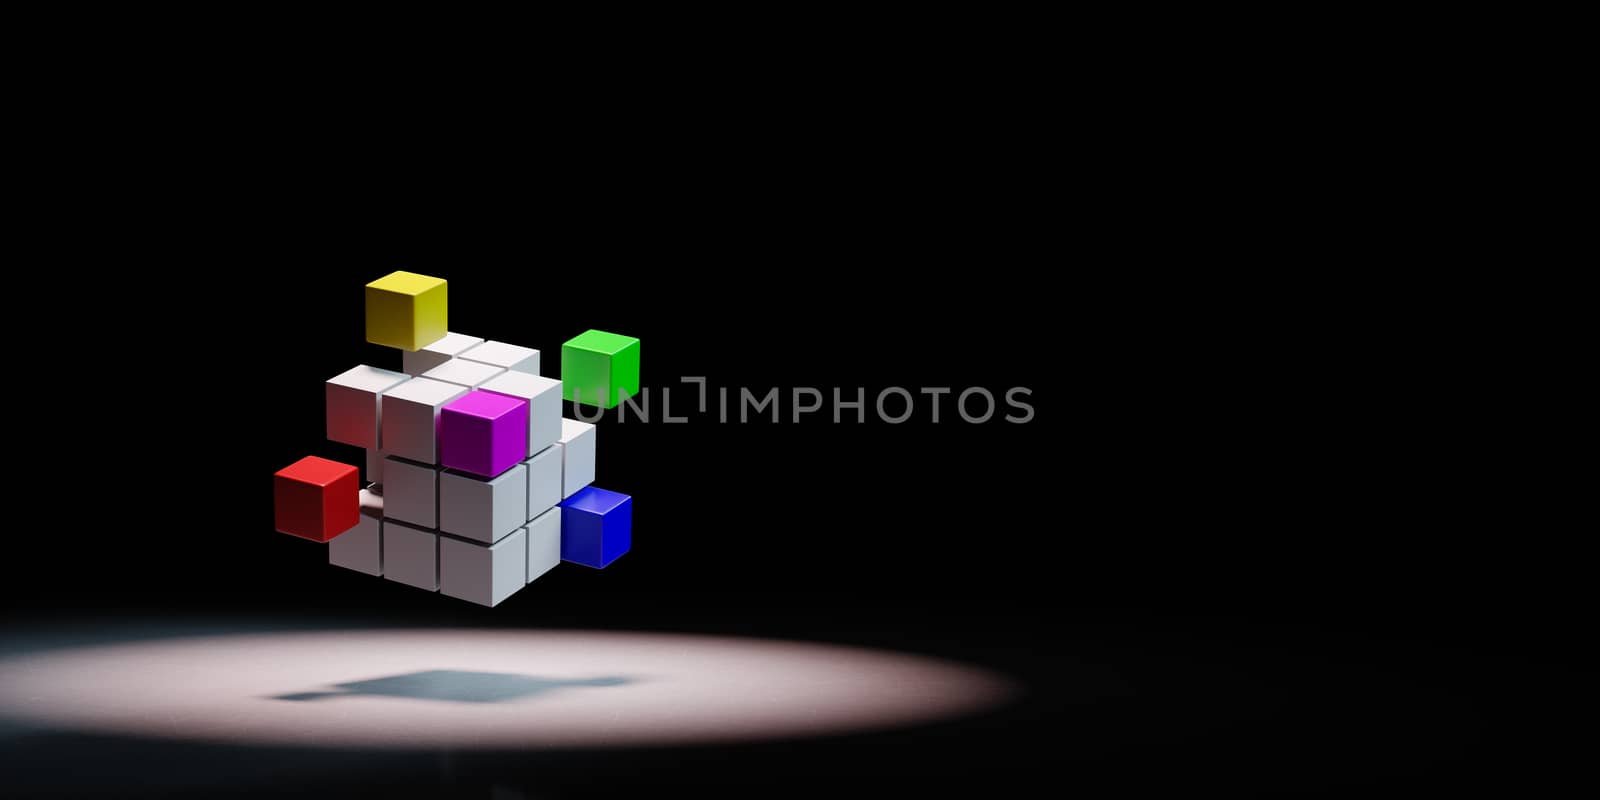 Combining Multicolor Cubes Spotlighted on Black Background by make